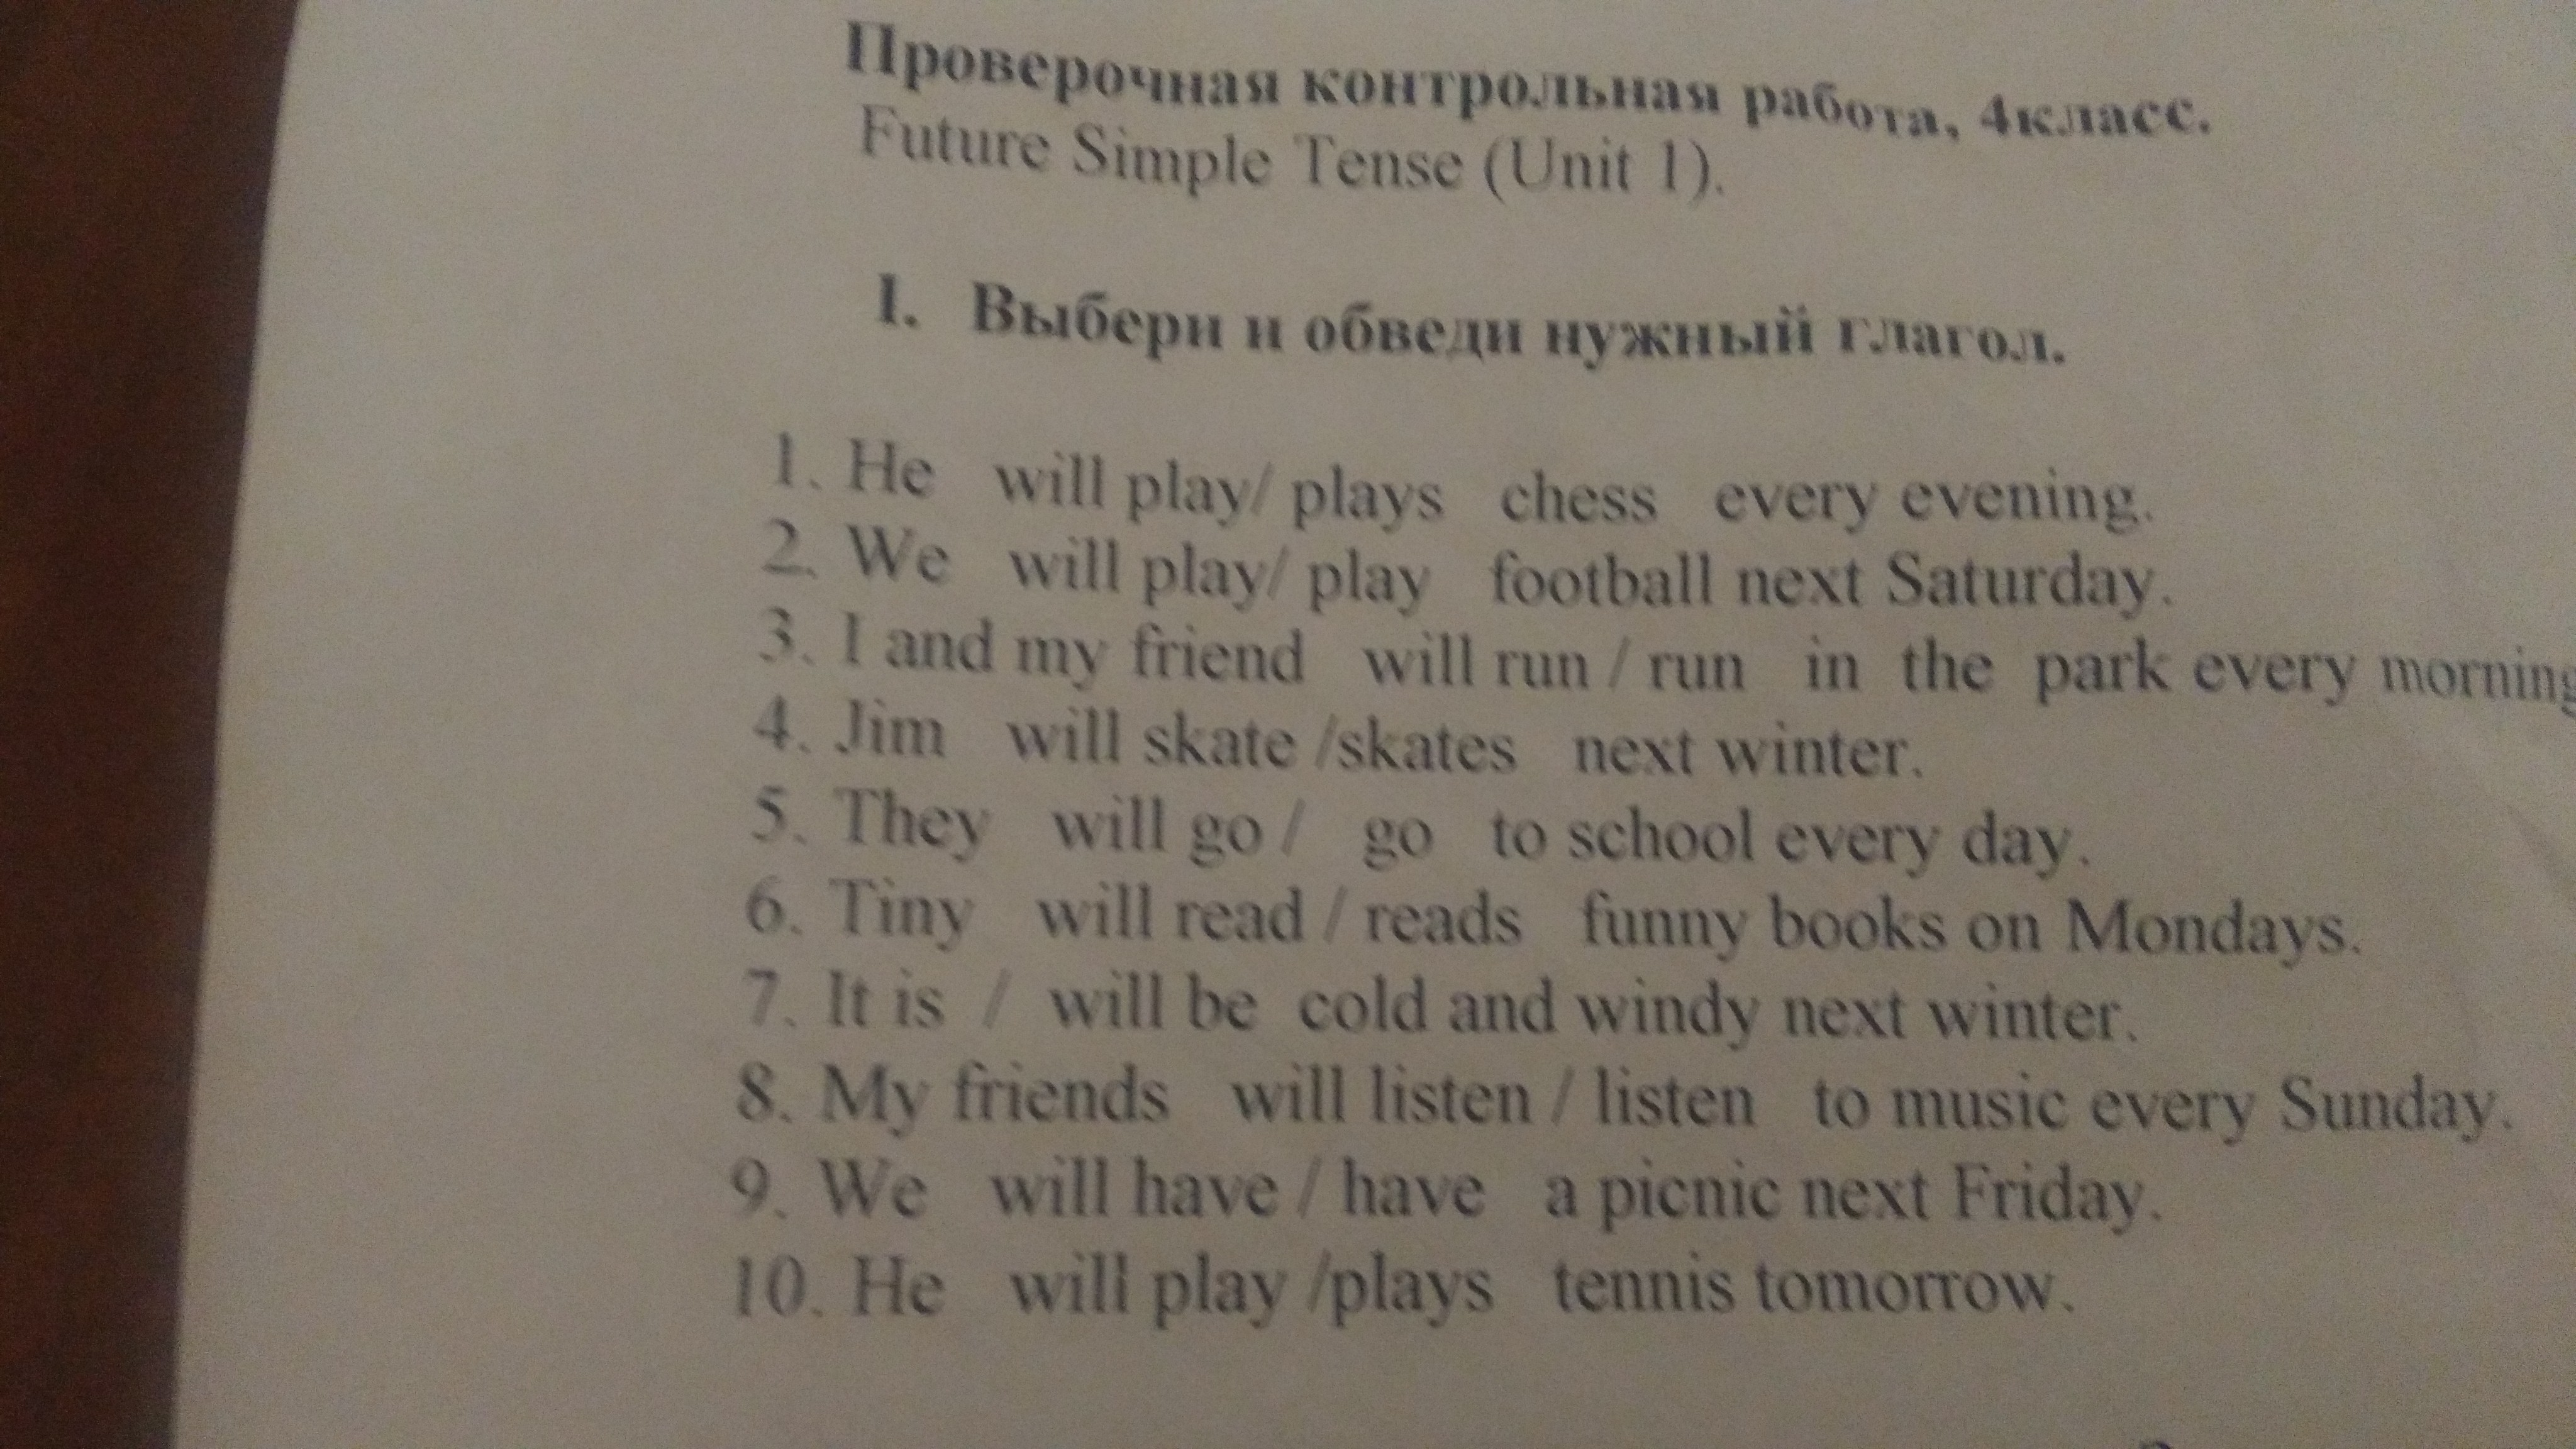 Выбери и обведи нужный глагол He will play / plays chess every evening 2 We will play / play fotball next Saturday 3 I and my friend will run / run in the park every morning 4Jim will skate / skates n?